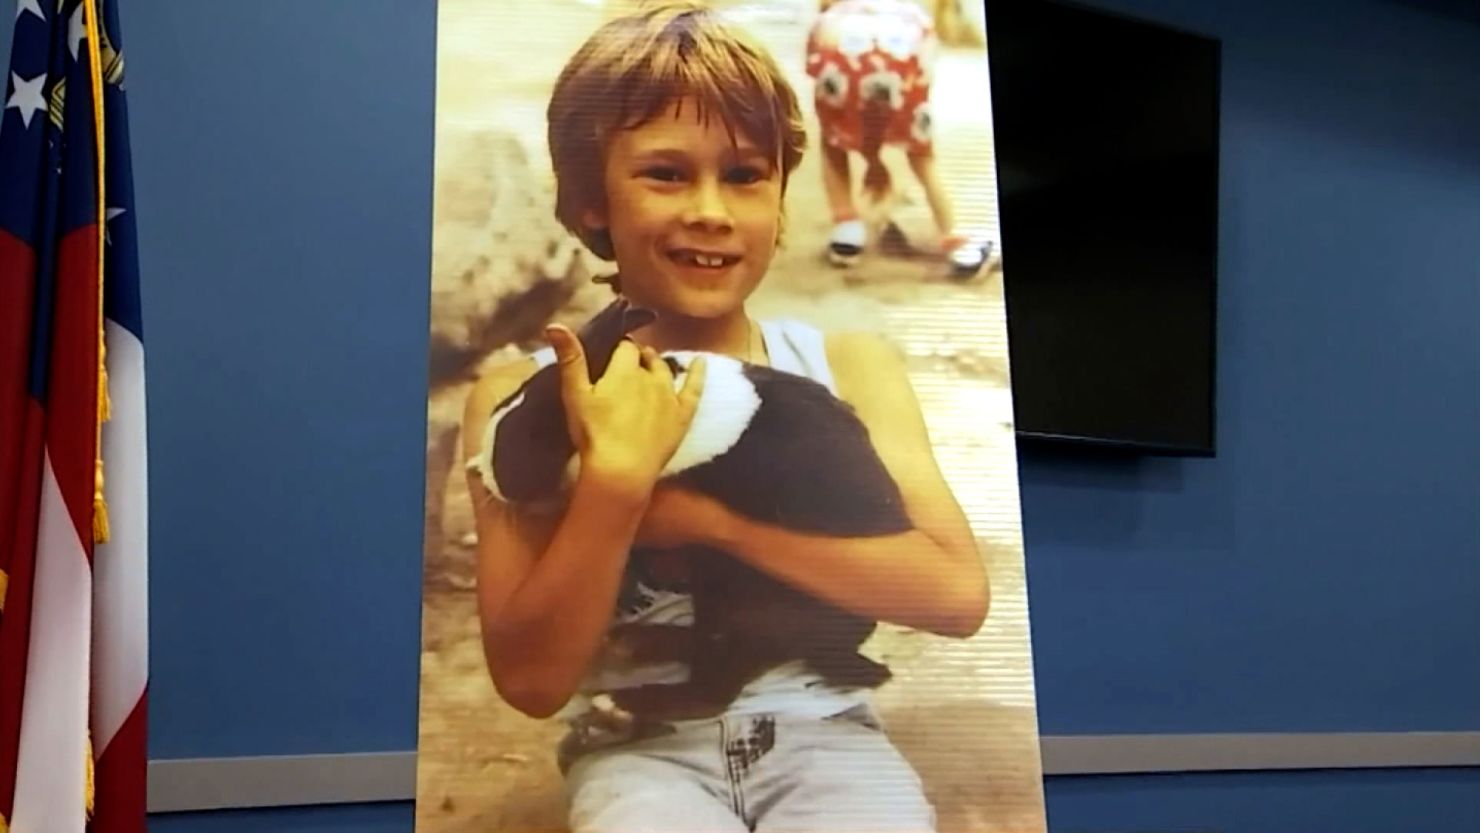 A picture of Joshua Harmon was displayed at a news conference by Roswell Police on Friday, July 23, 2021, when they announced a 56-year-old man had been arrested in connection to his murder 33 years ago 